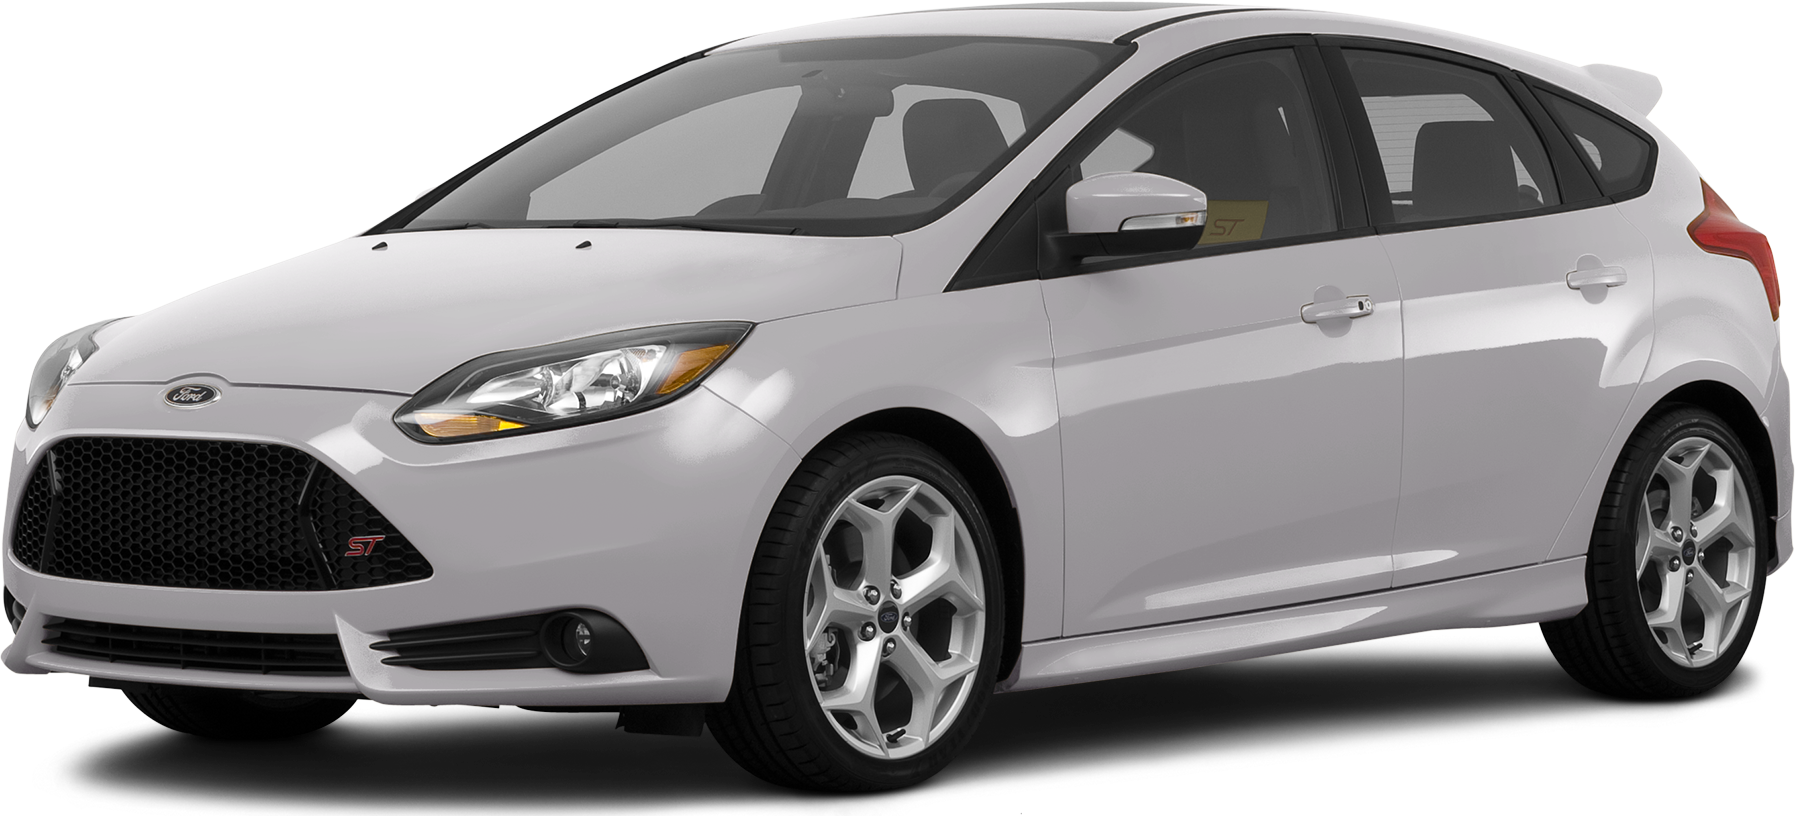 2013 Ford Focus ST Price, Value, Ratings & Reviews